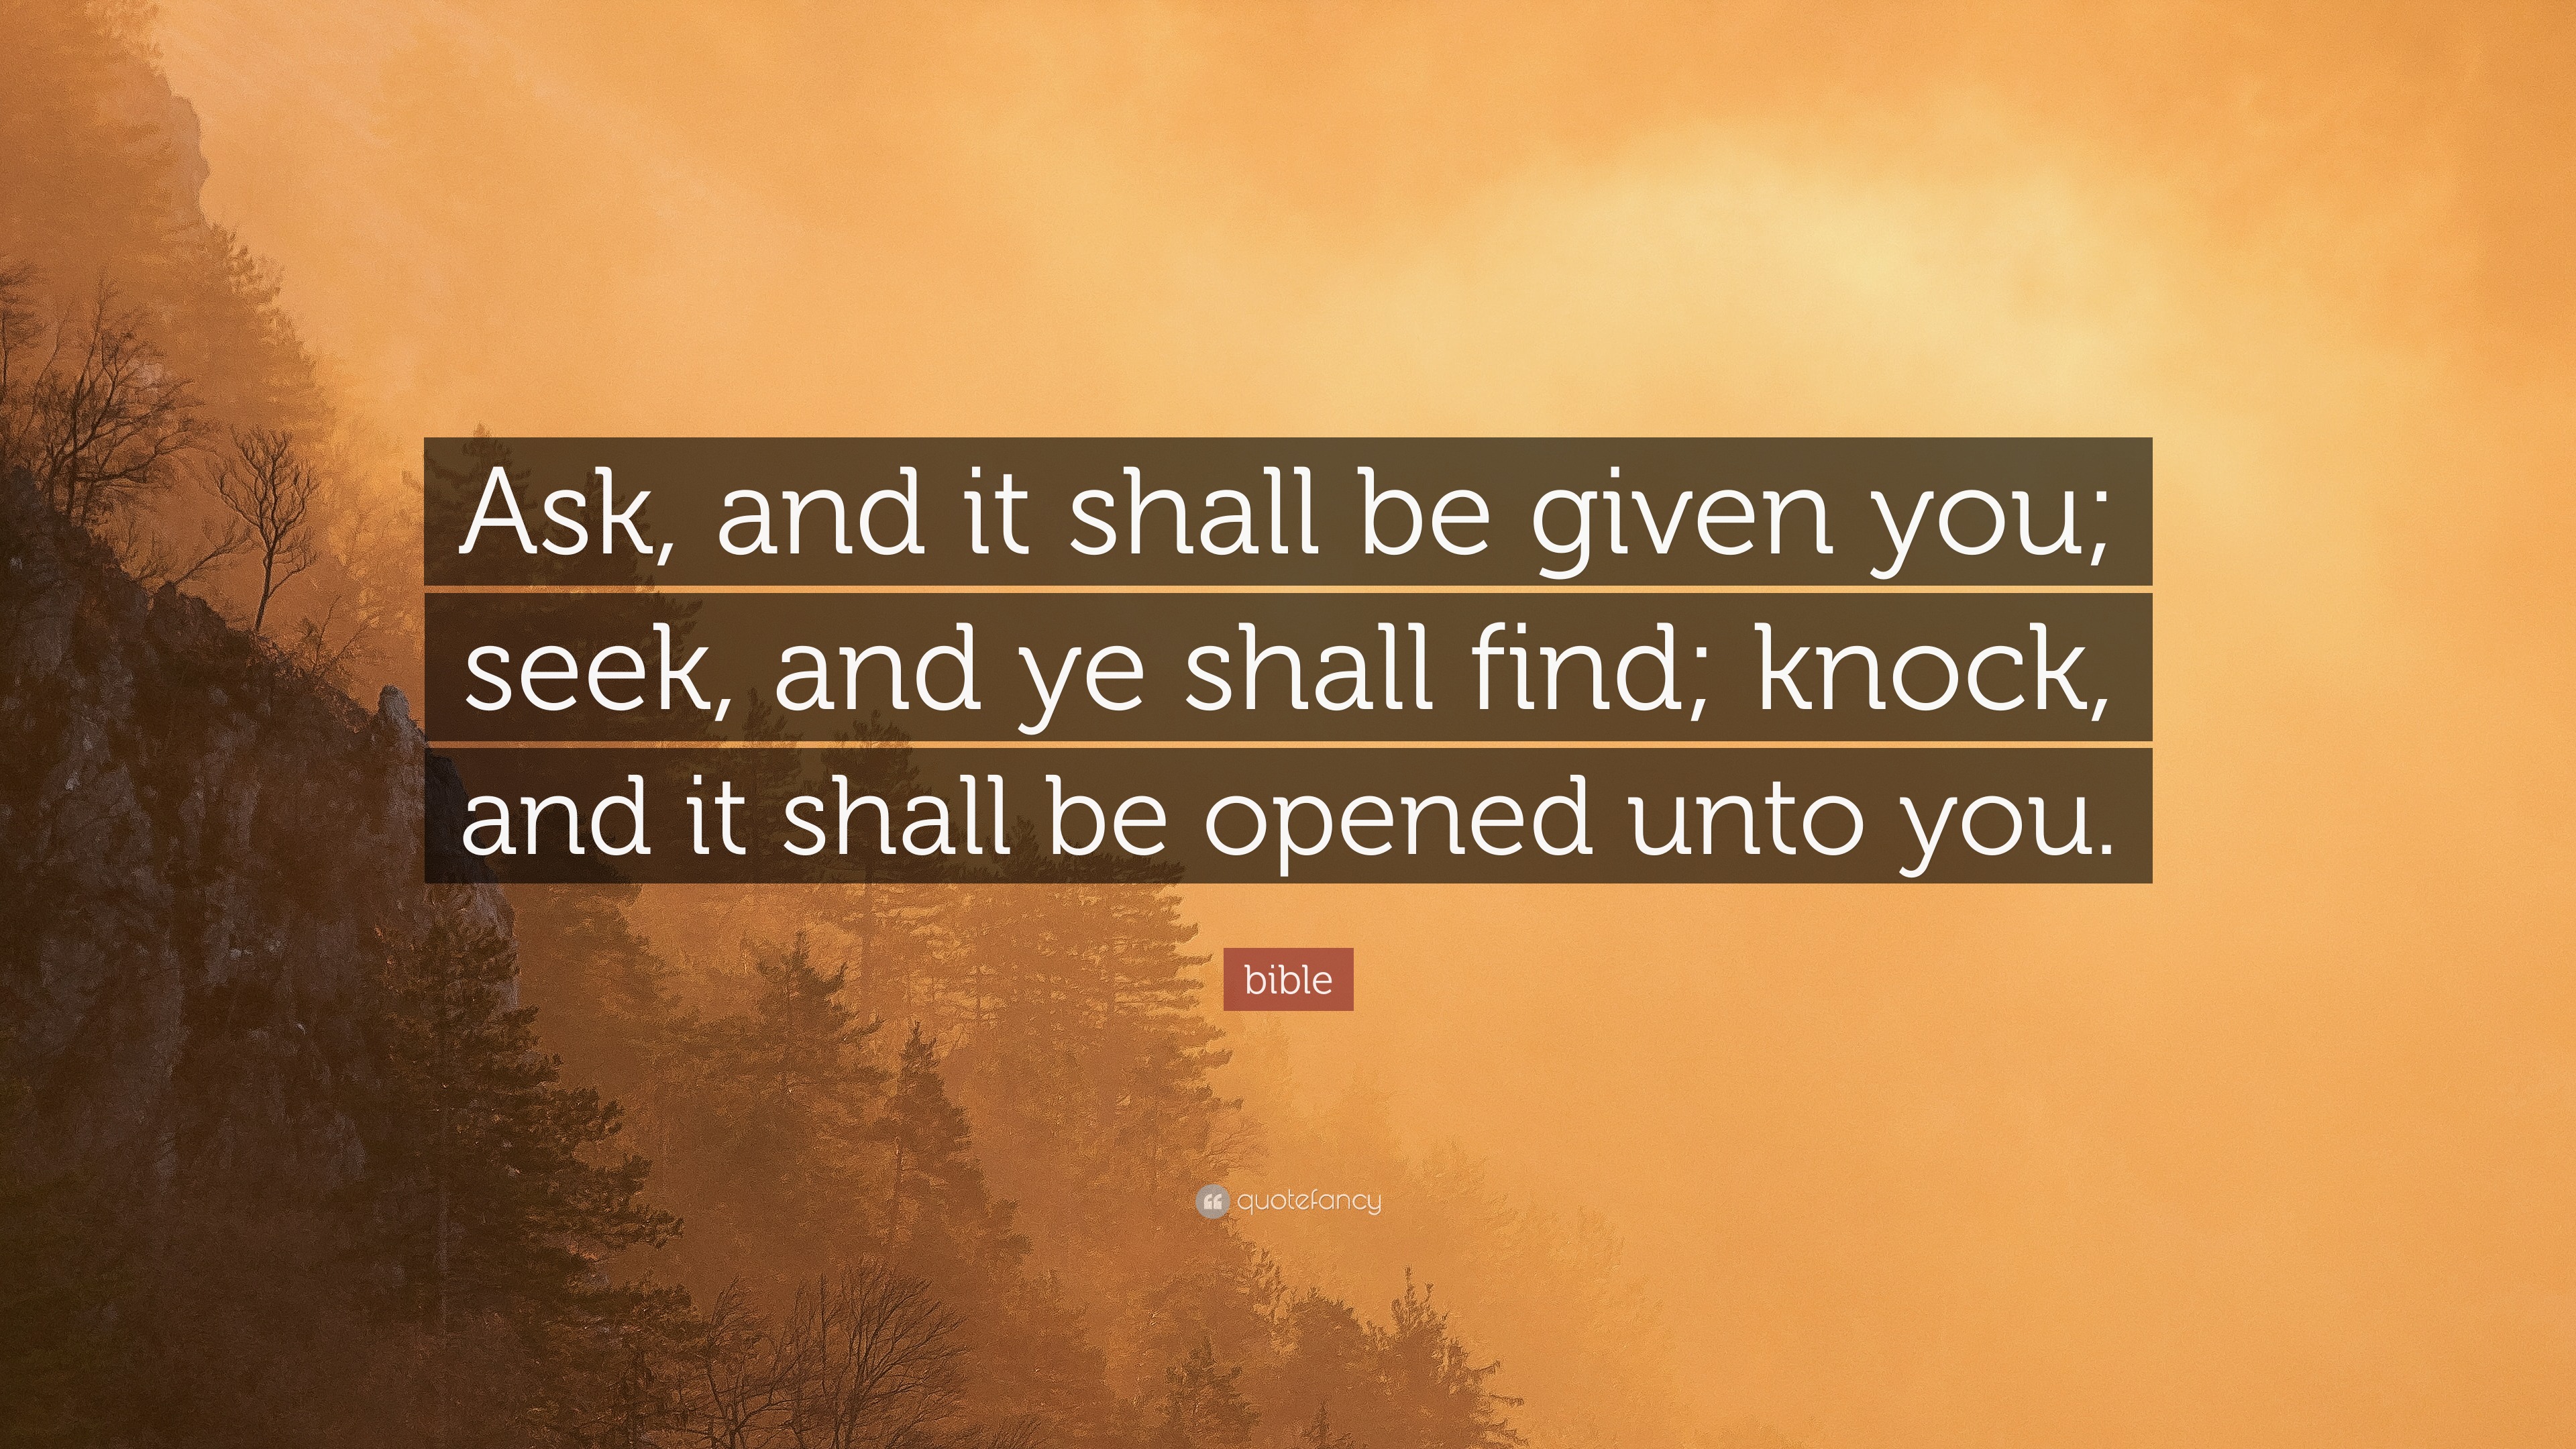 8098584 Bible Quote Ask And It Shall Be Given You Seek And Ye Shall Find Knock And It Shall Be 